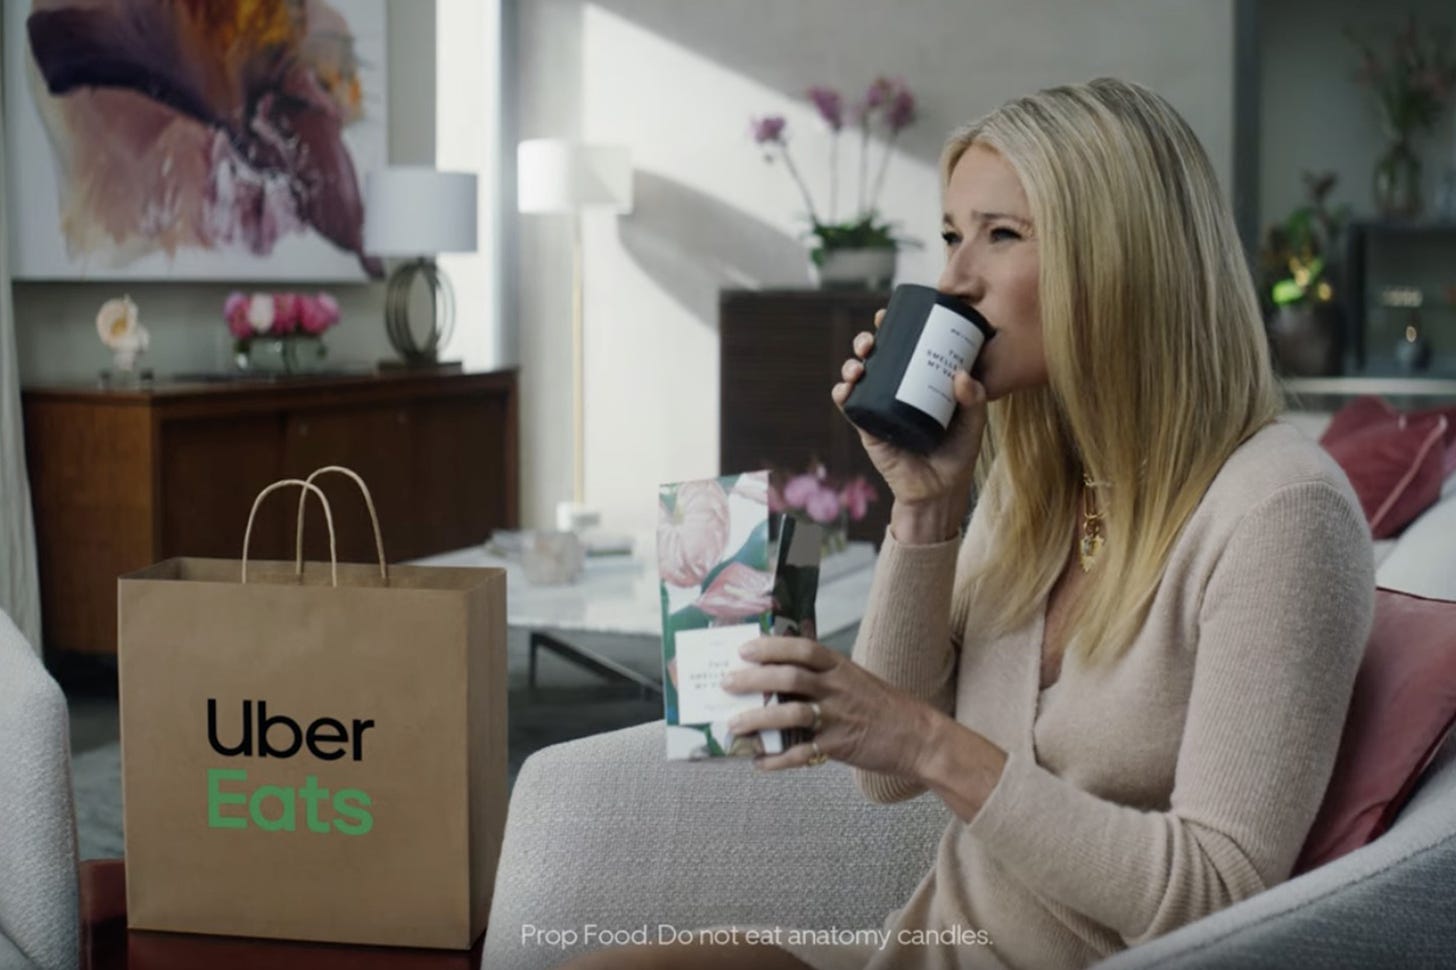 Gwyneth Paltrow tastes her vagina candle in Super Bowl commercial